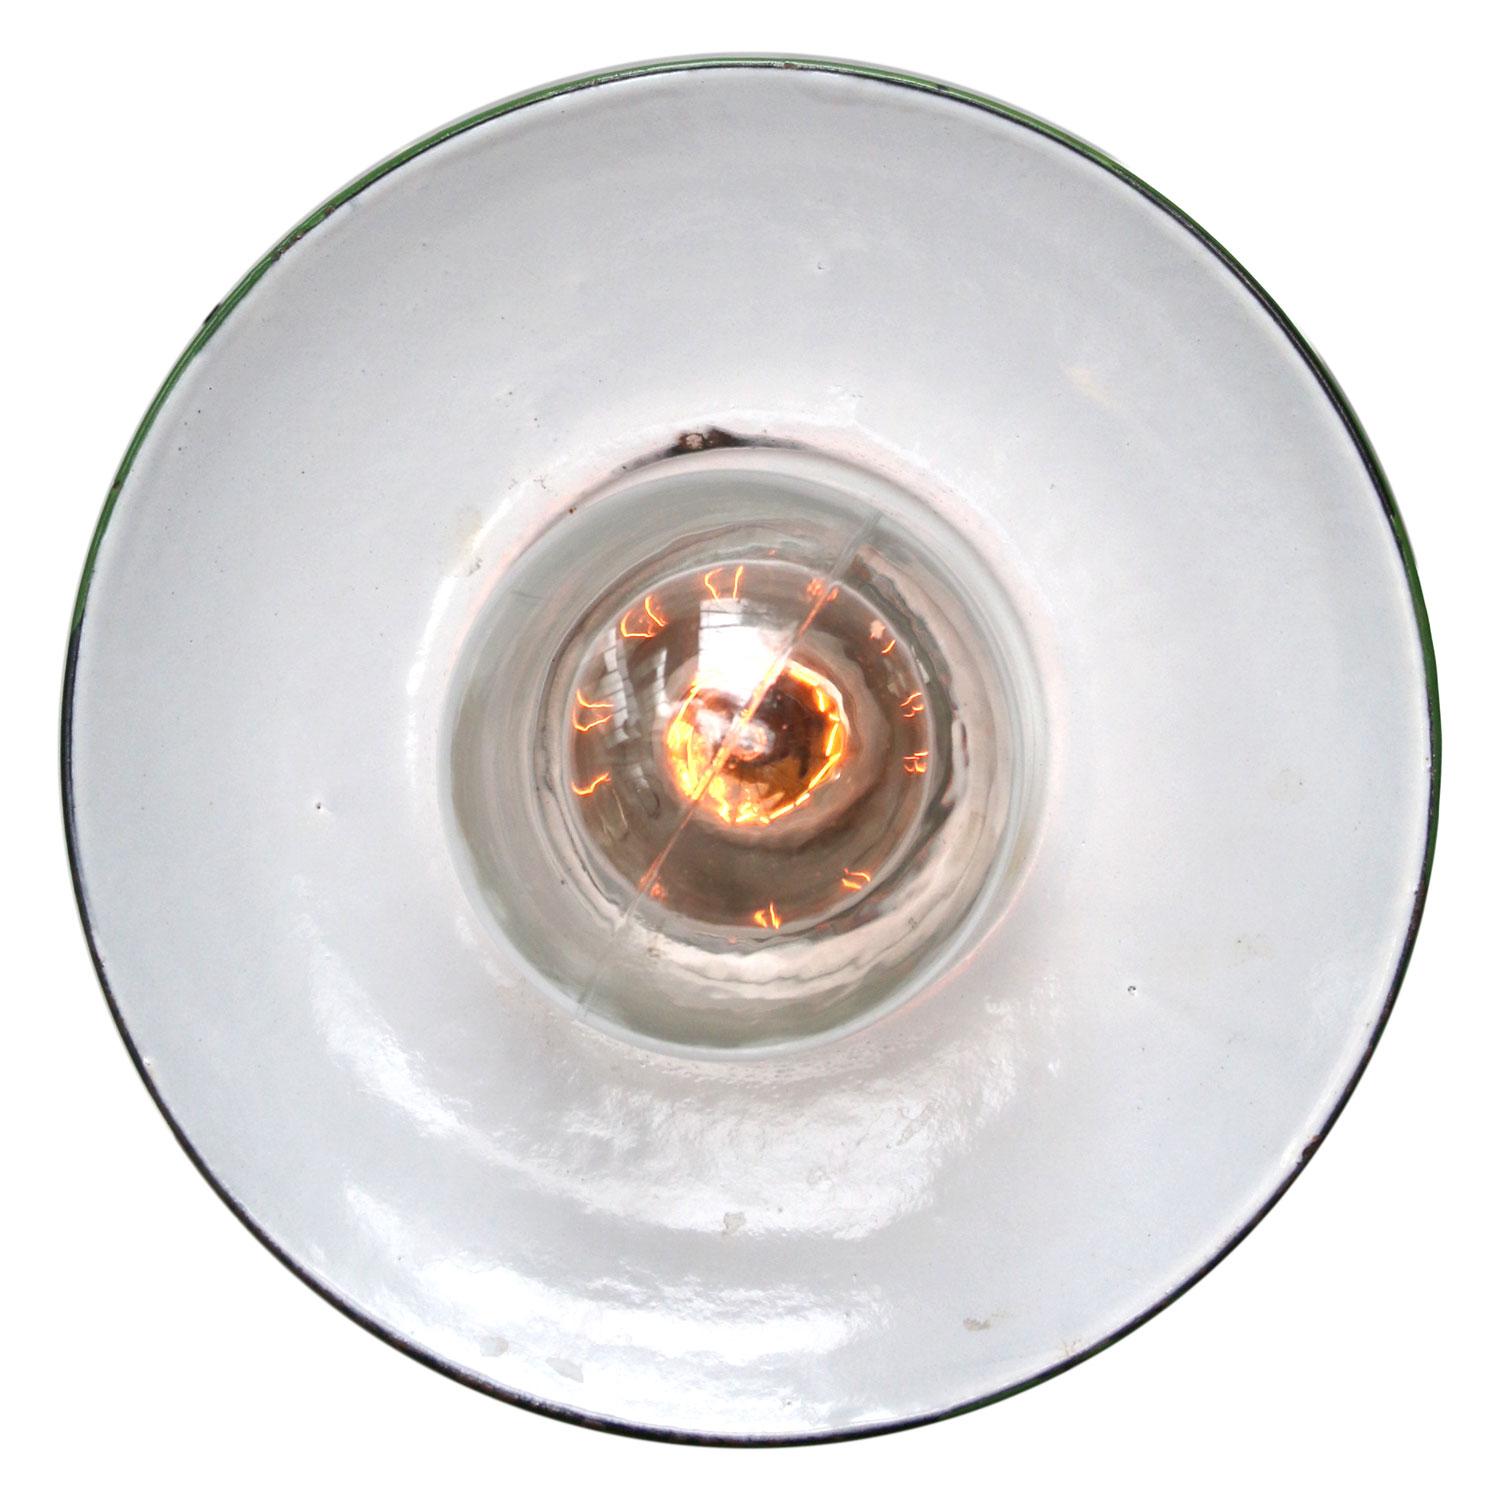 Porcelain Industrial hanging lamp.
White porcelain, cast iron and clear glass.
green enamel shade
2 conductors, no ground.

Weight: 1.80 kg / 4 lb

Priced per individual item. All lamps have been made suitable by international standards for